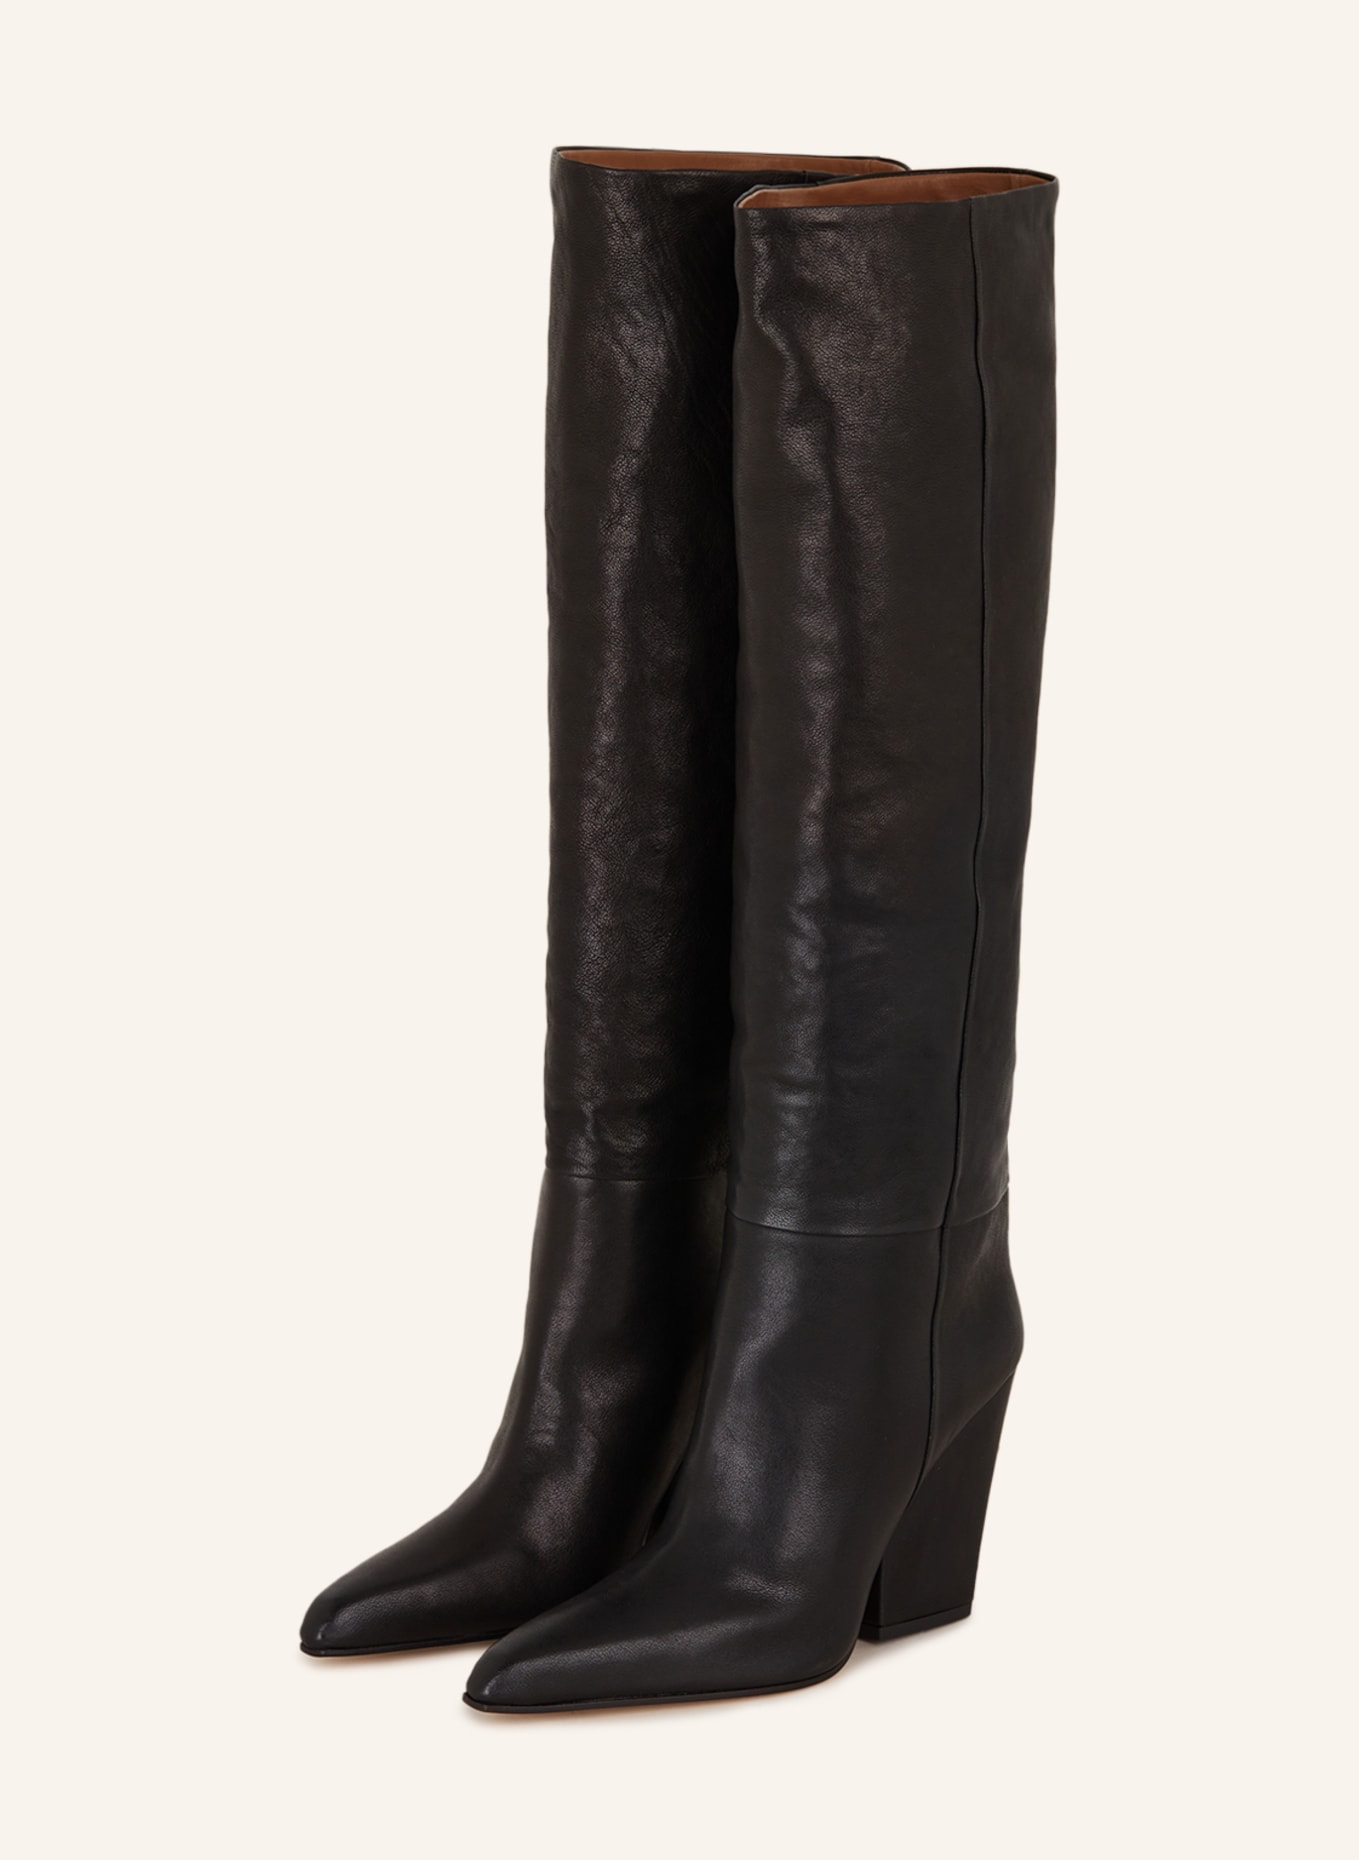 Anja 70 leather knee-high boots